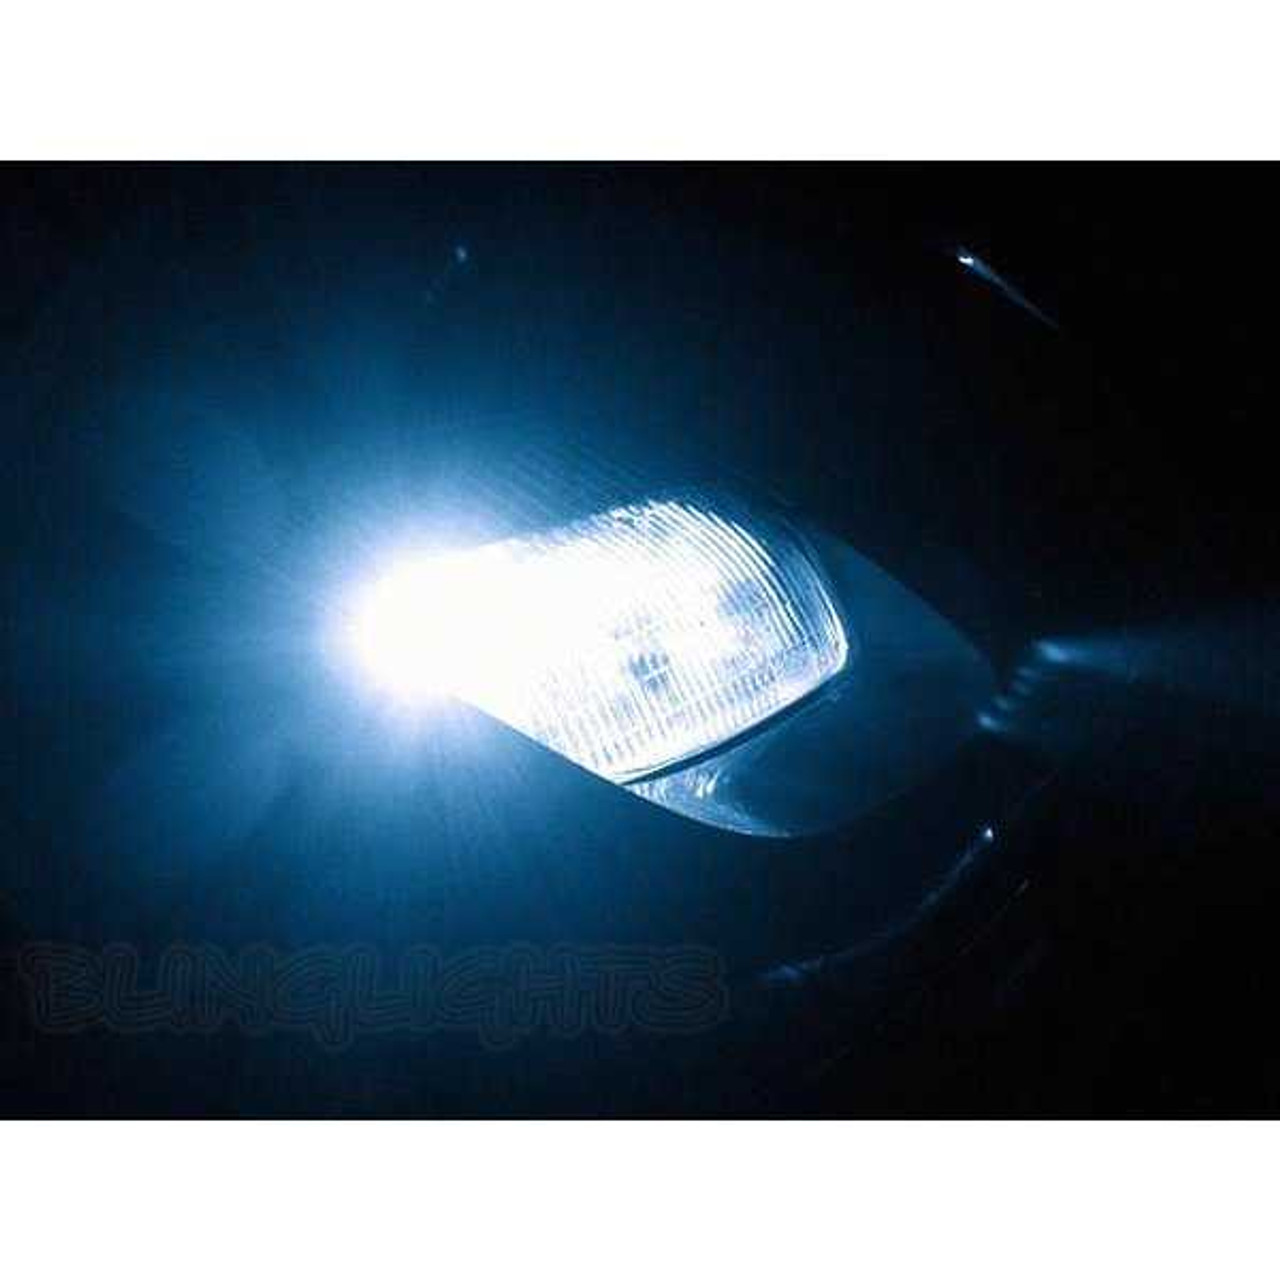 Pontiac Sunfire Bright White Replacement Light Bulbs for Headlamps Headlights Head Lamps Lights